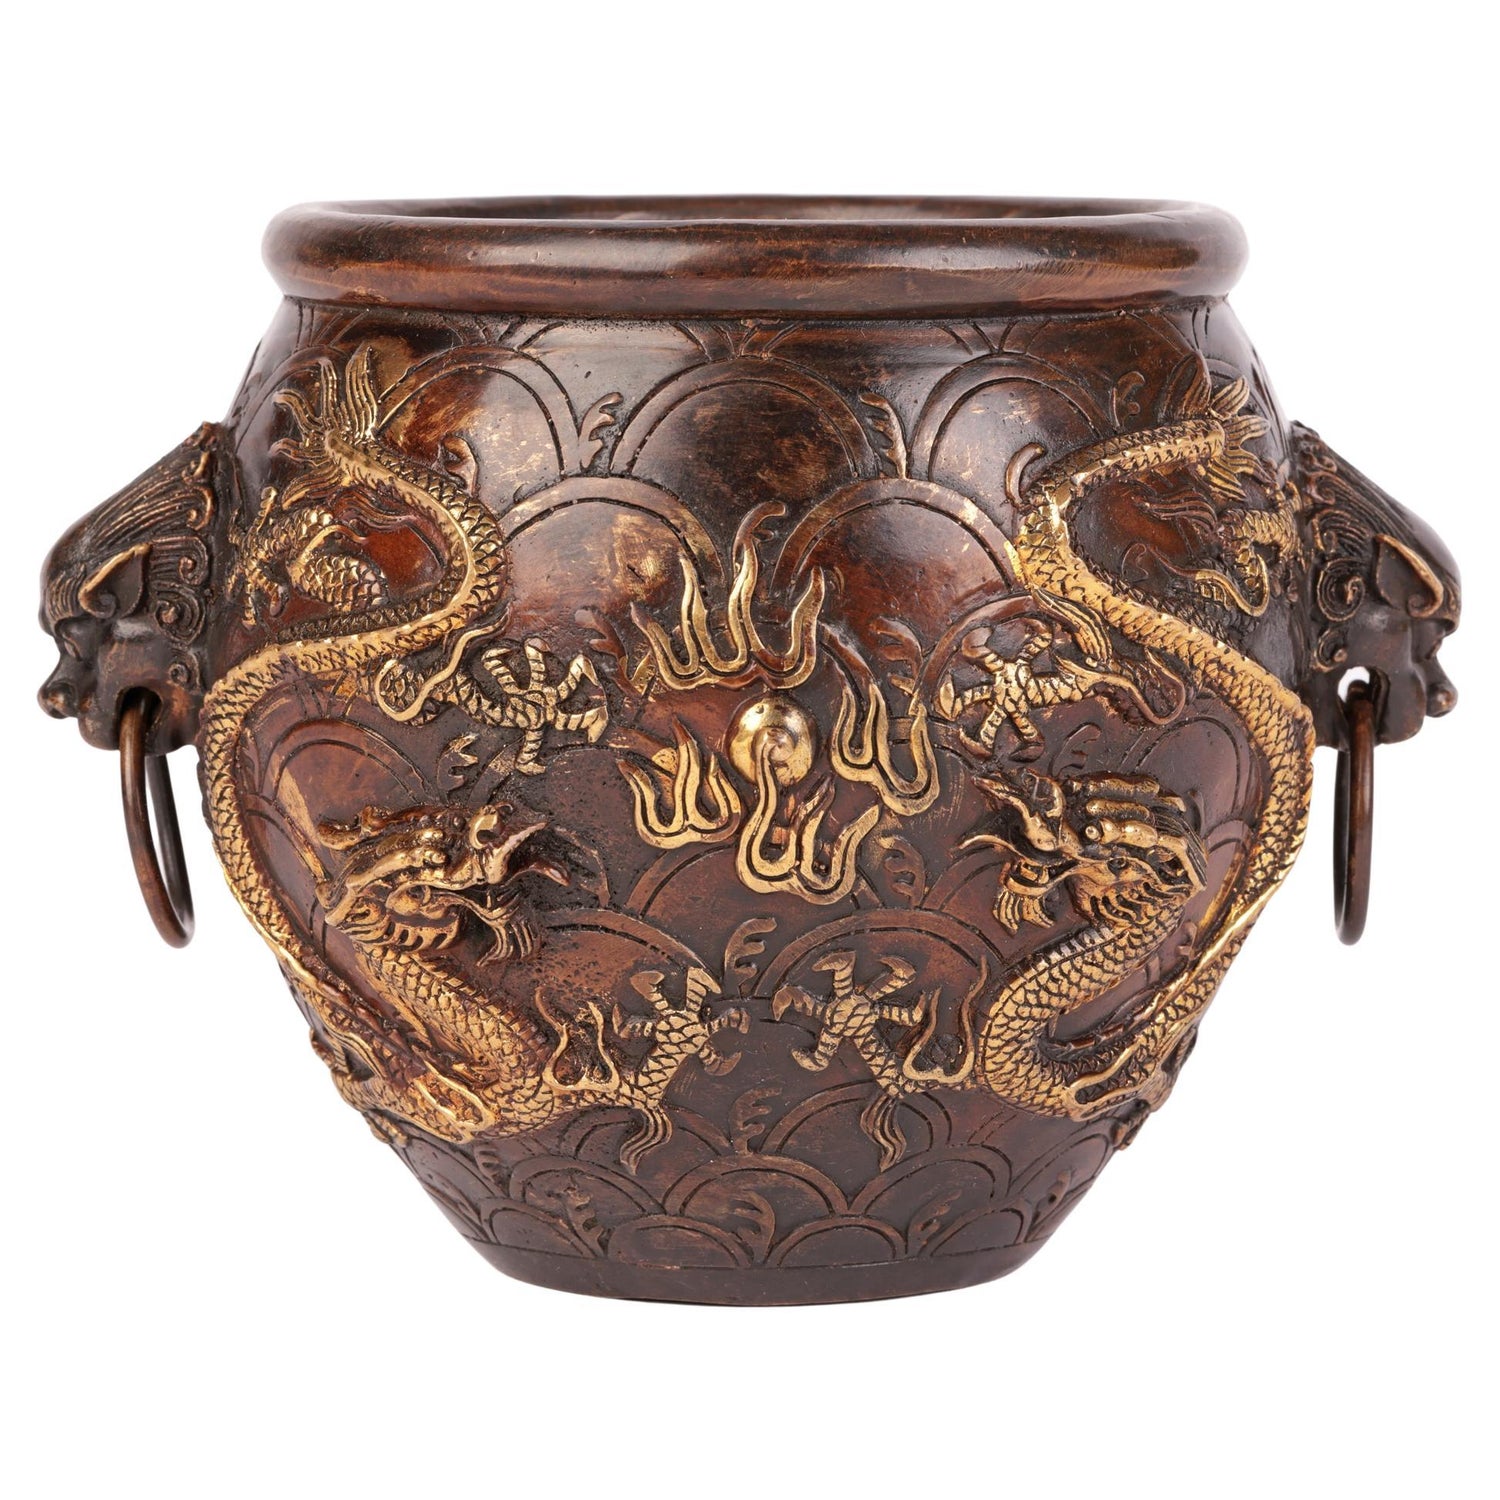 Gilded Zun Vessel with Dragon Ear Handles in Altar Red and Variable Glazes  in Qing Dynasty (19th century) (HL No. 054)